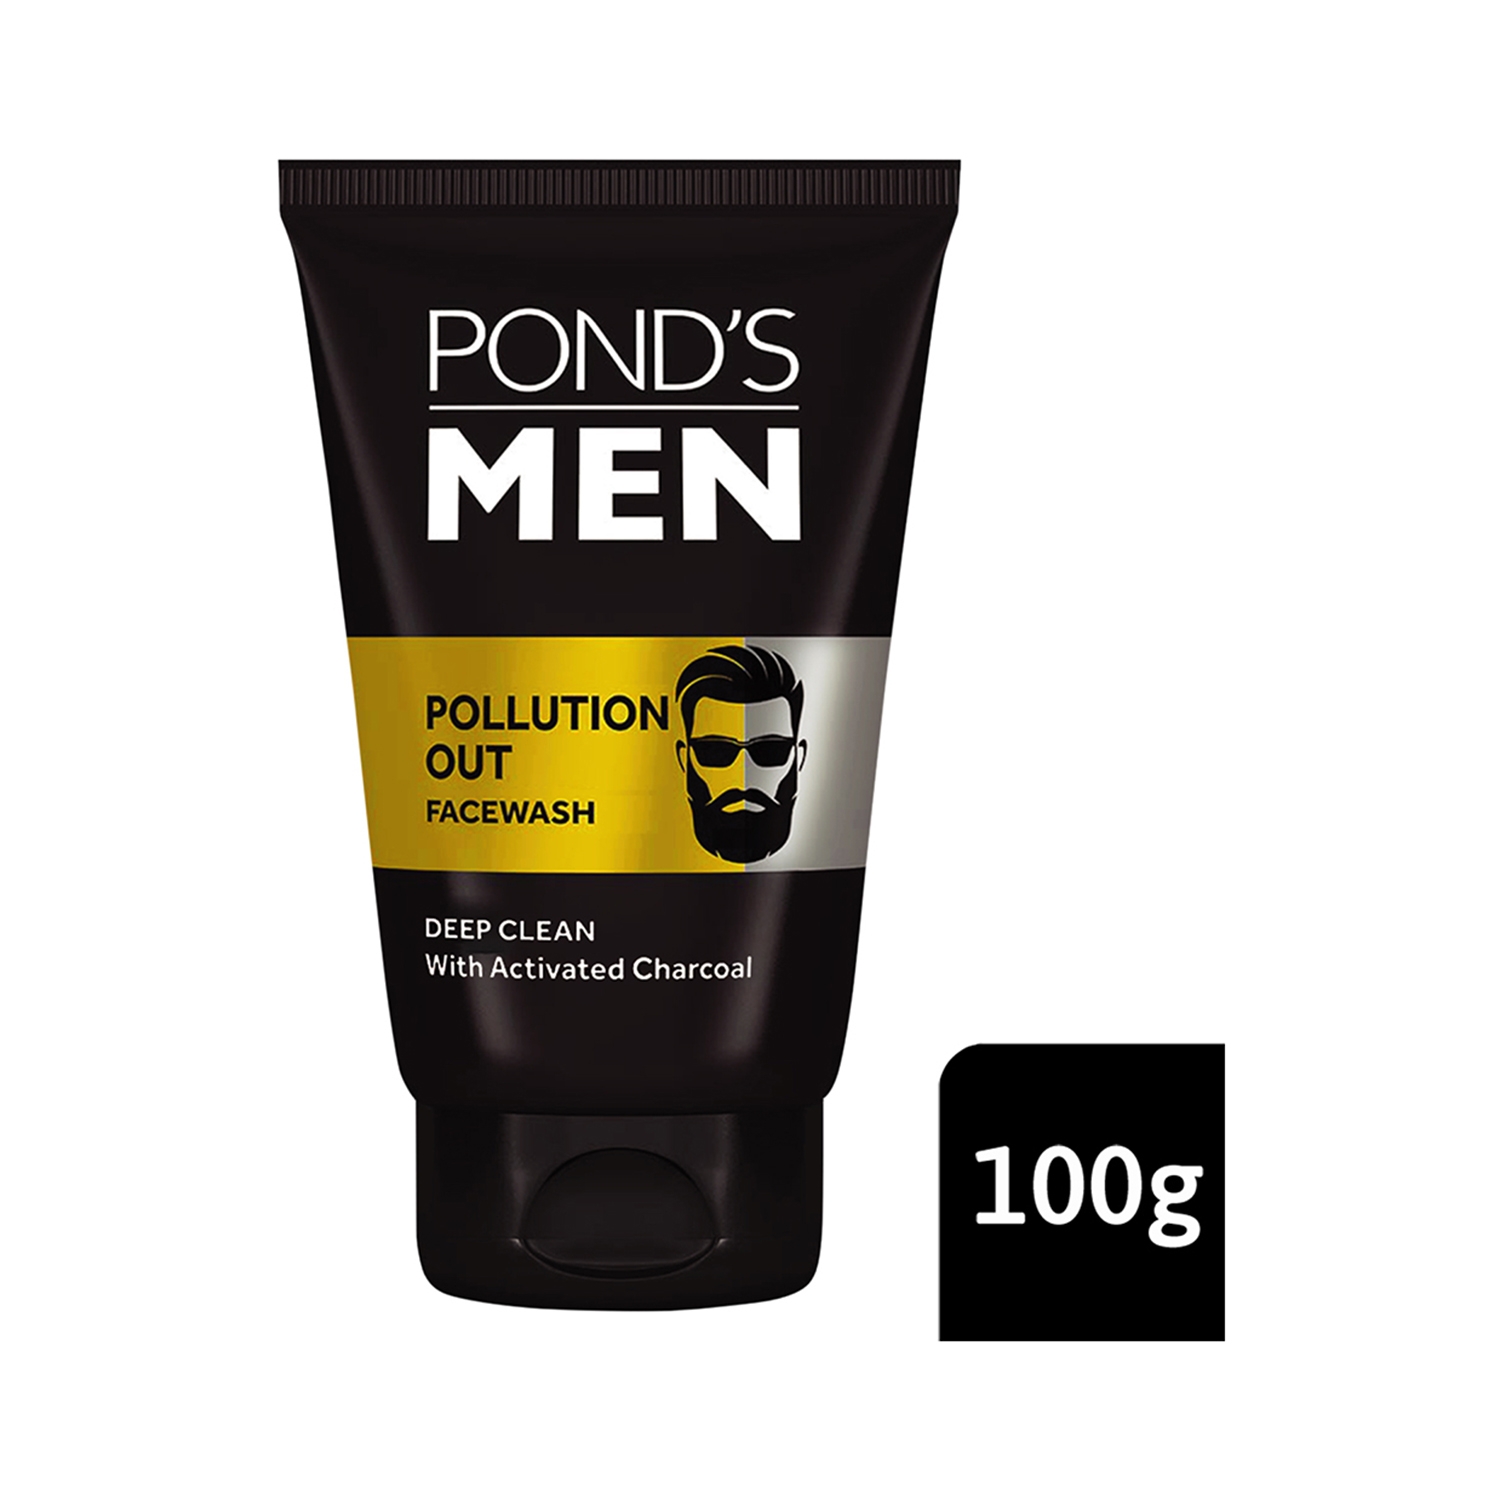 Pond's | Pond's Men Pollution Out Activated Charcoal Deep Clean Facewash - (100g)